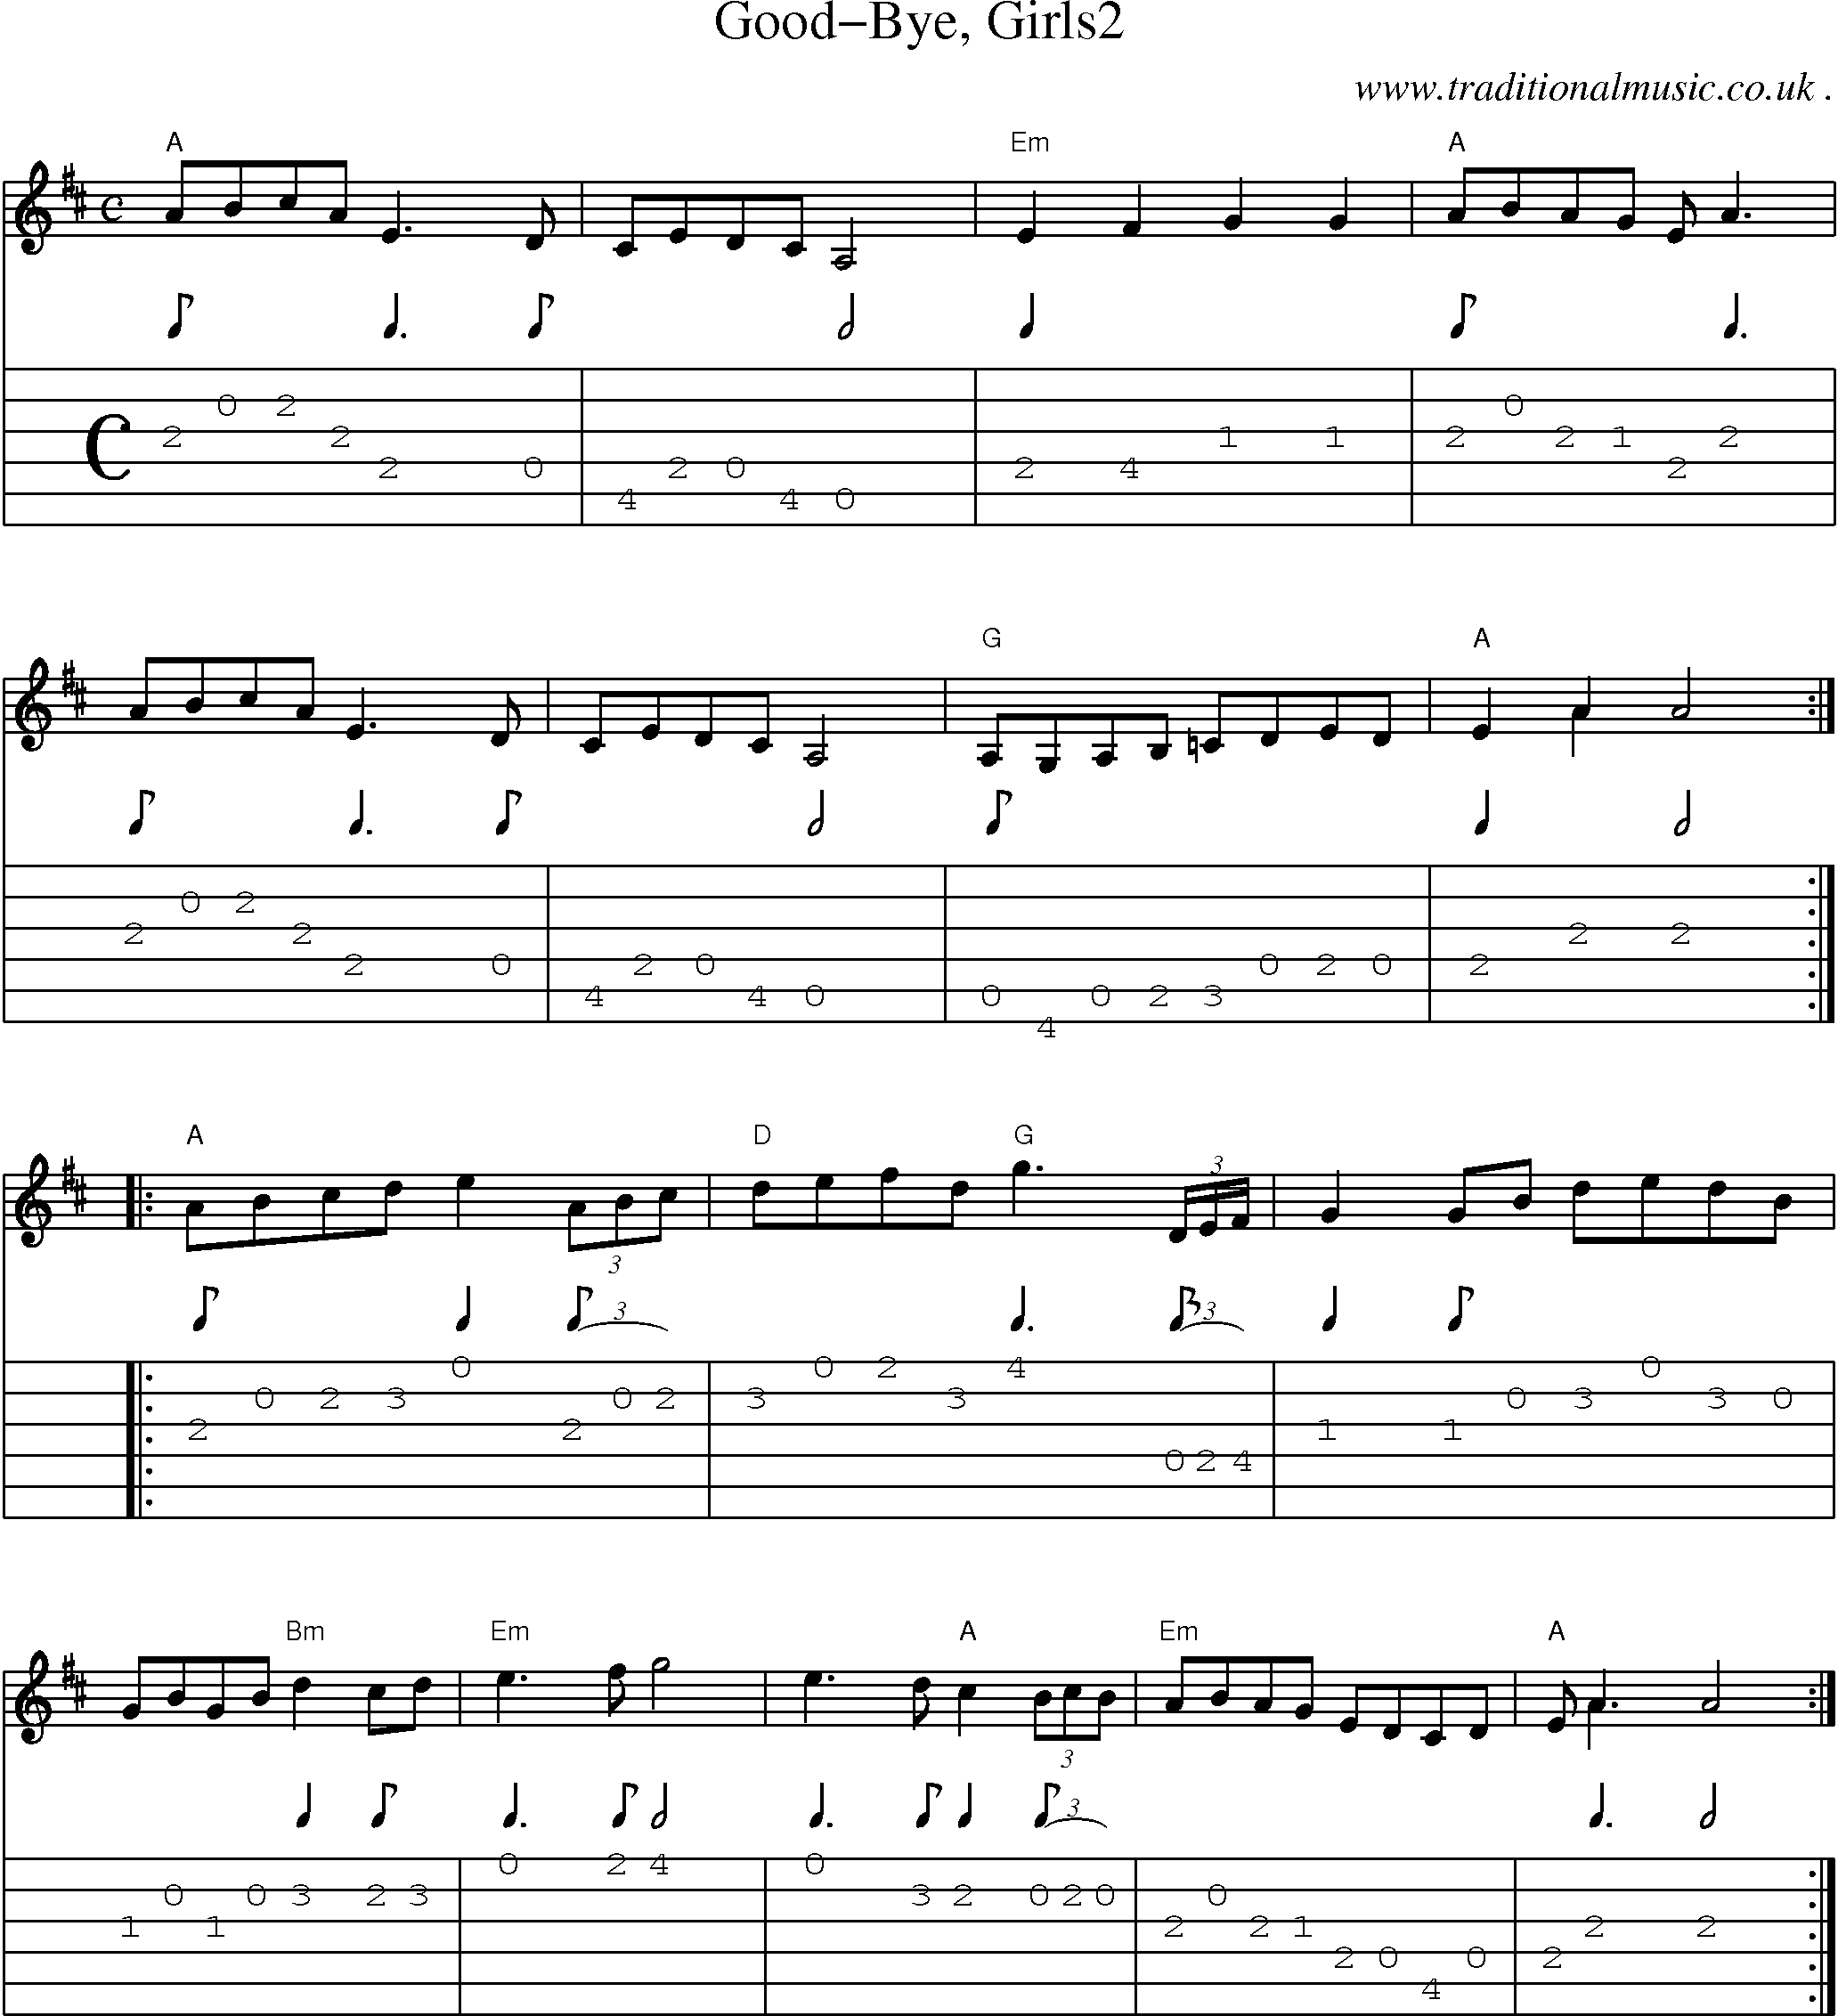 Music Score and Guitar Tabs for Good-bye Girls2